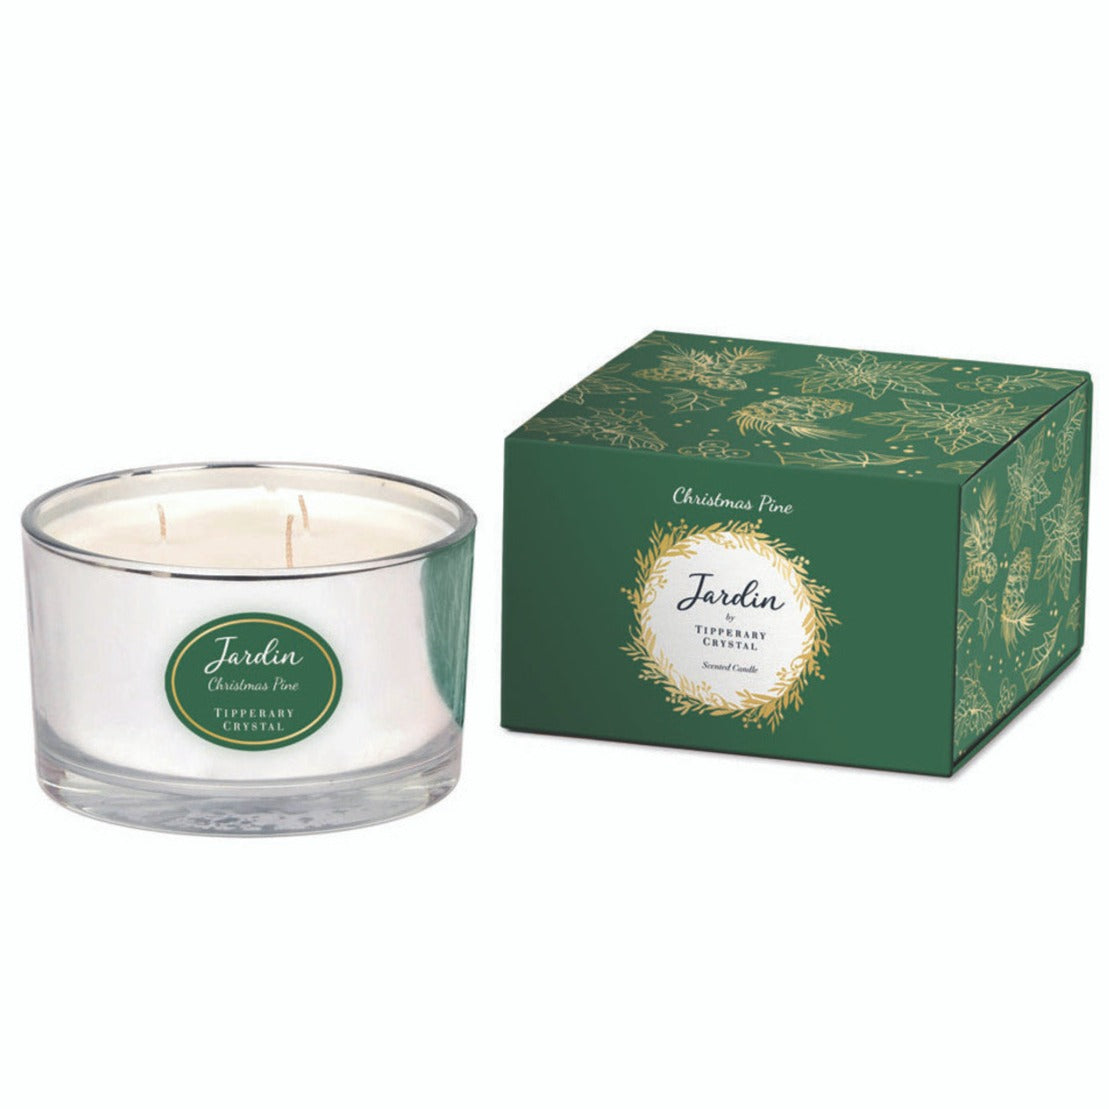 Tipperary Crystal Jardin Collection 3 Wick Candle - Christmas Pine